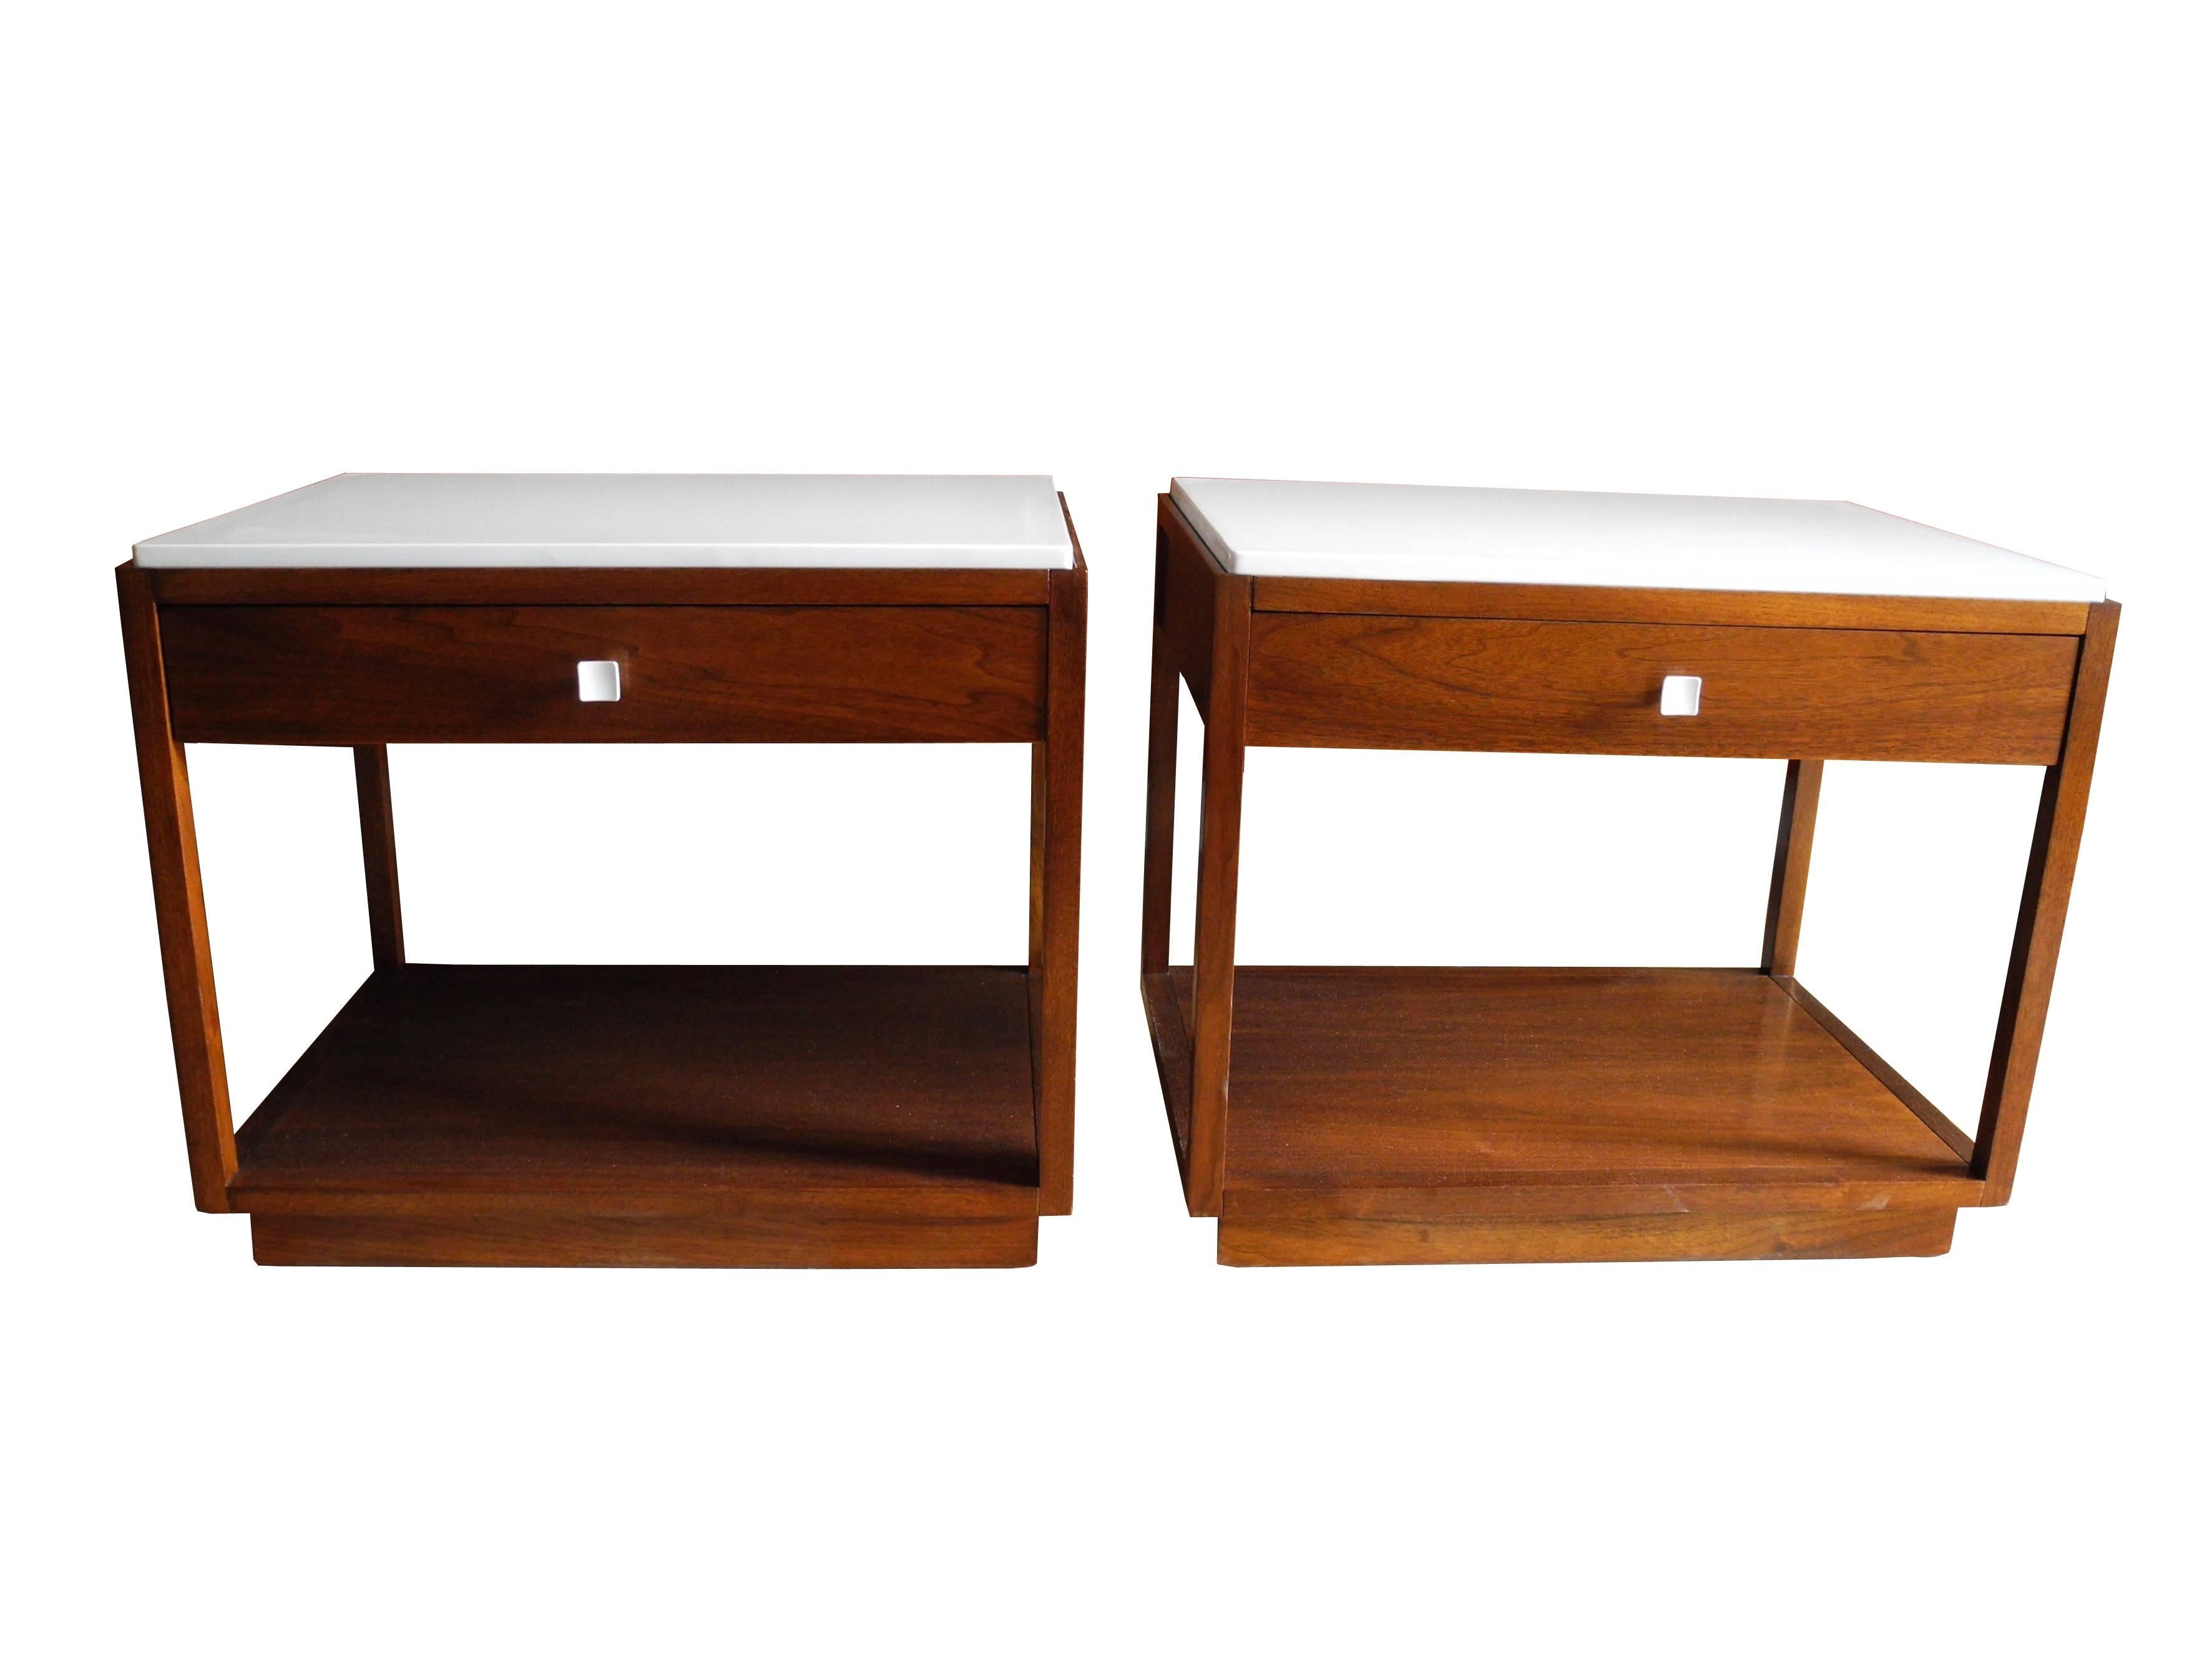 These pair of modern nightstands are made of walnut with white quartz stone tops.
 